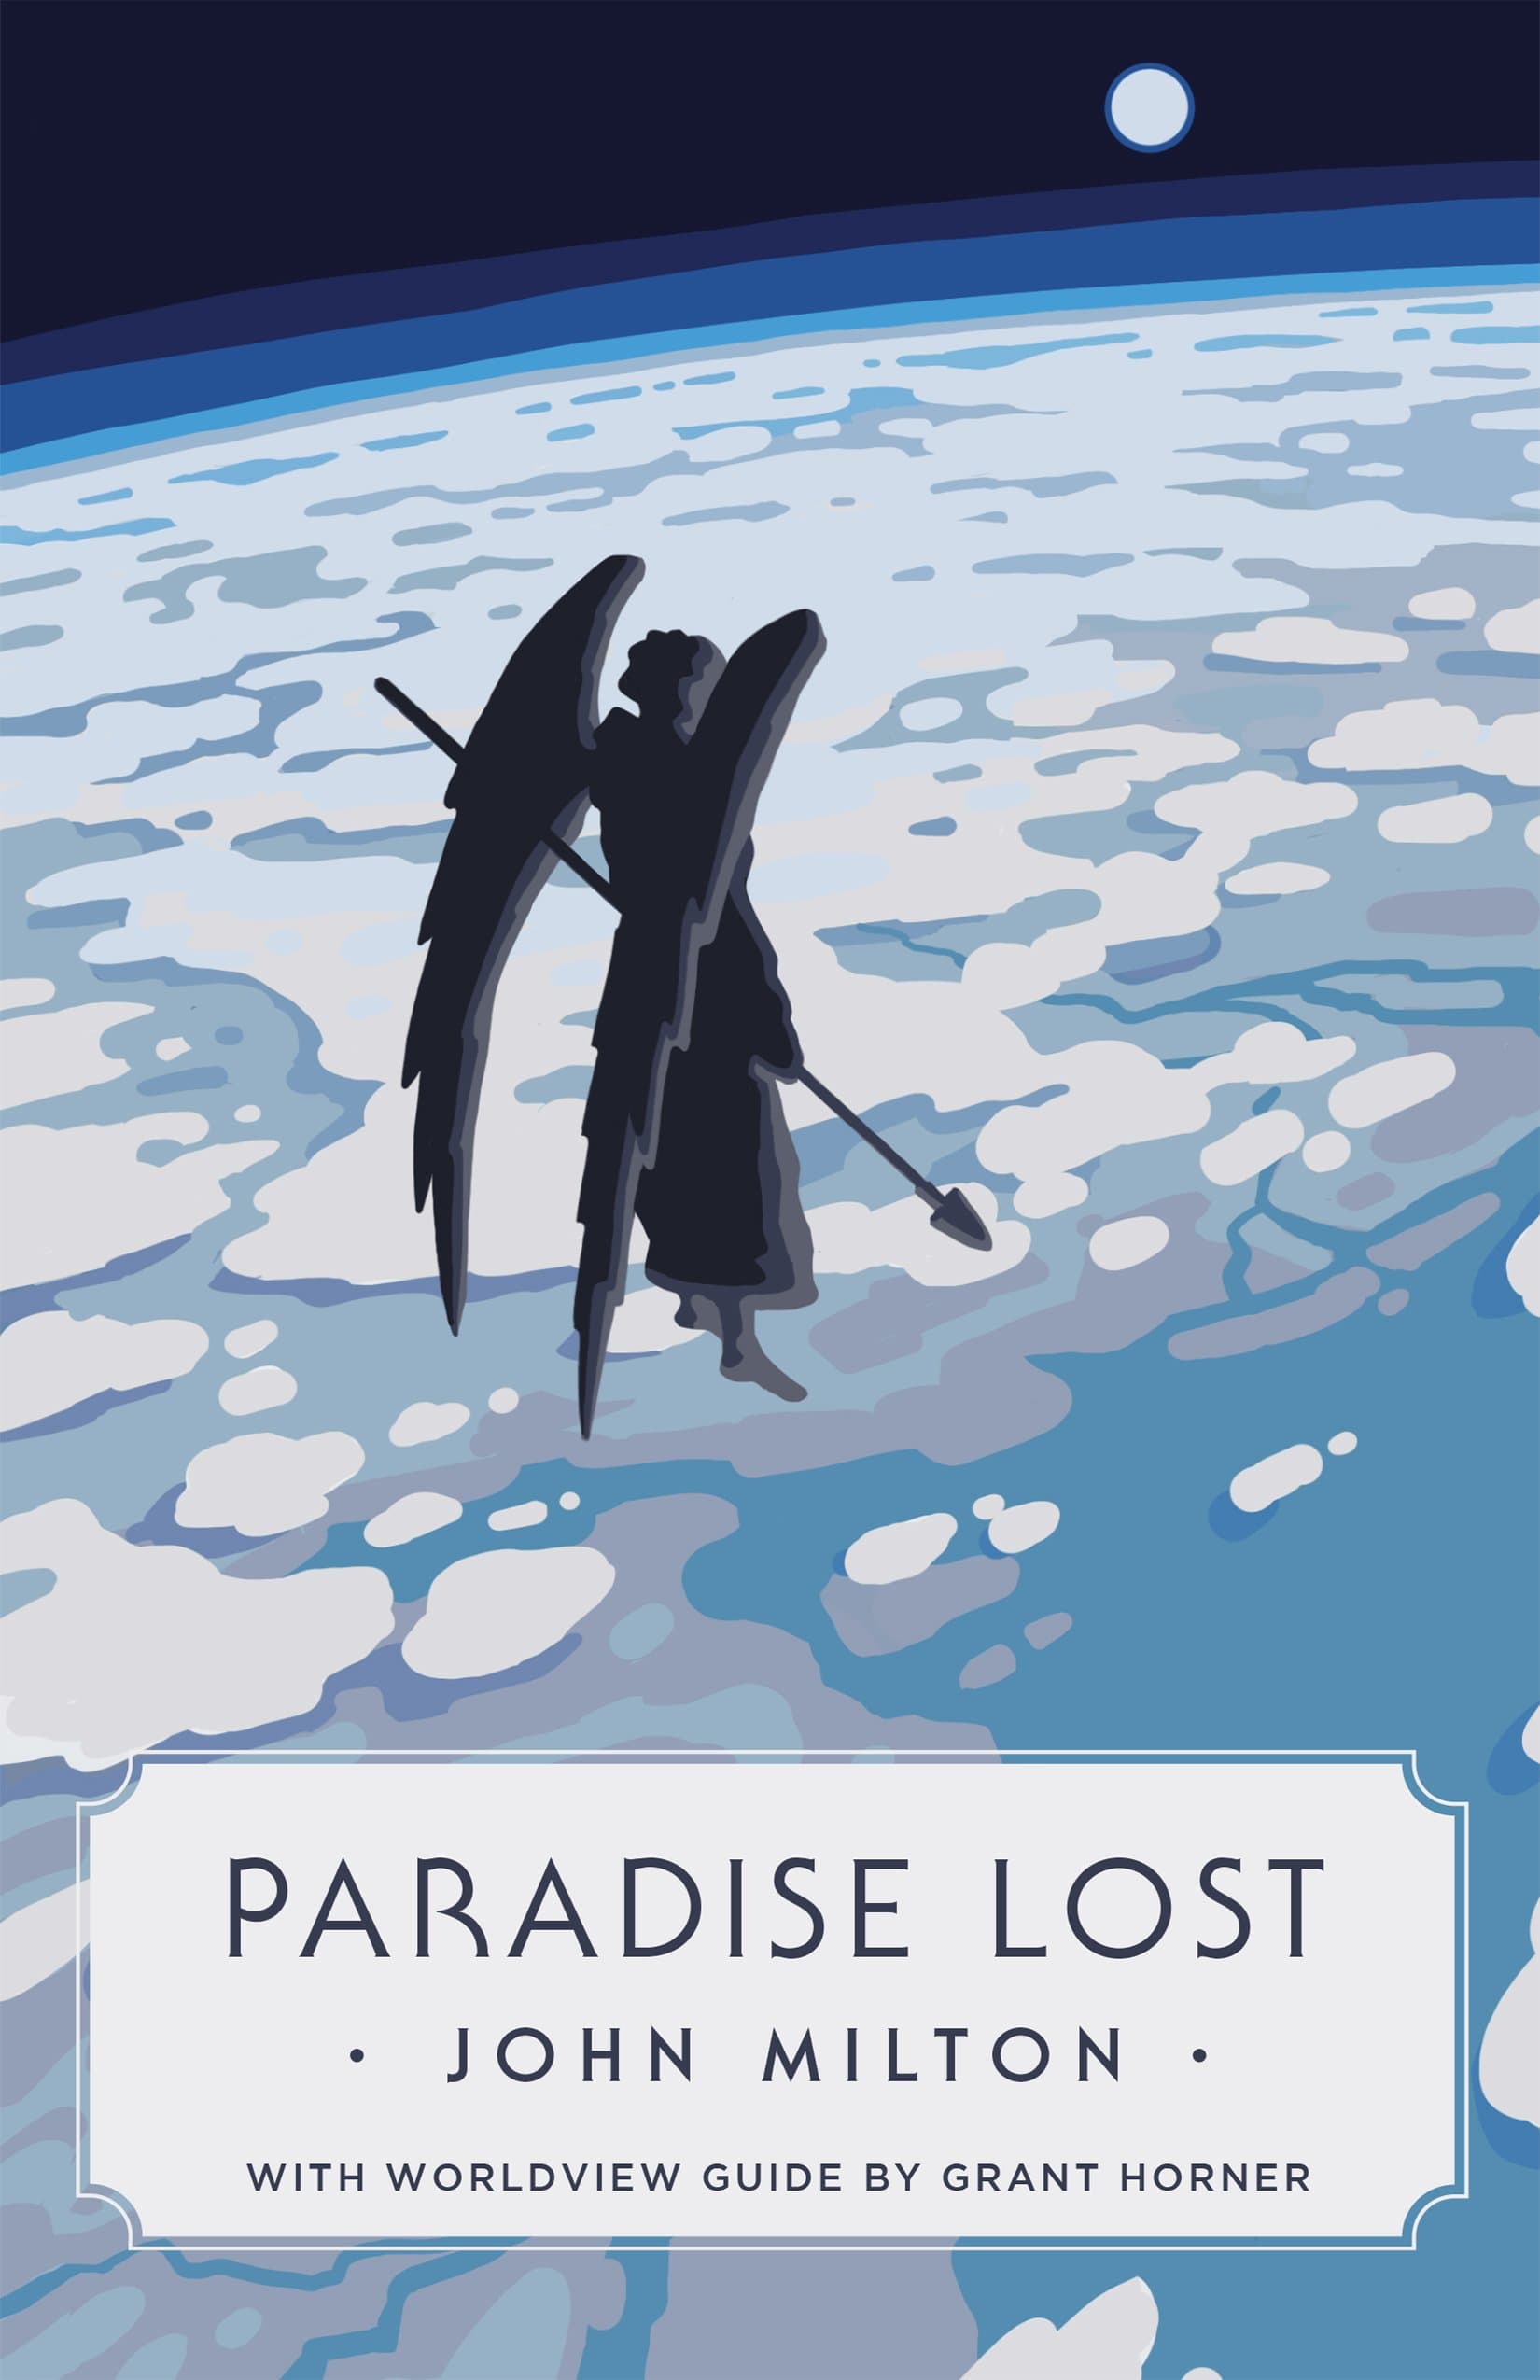 Worldview Guide for Paradise Lost